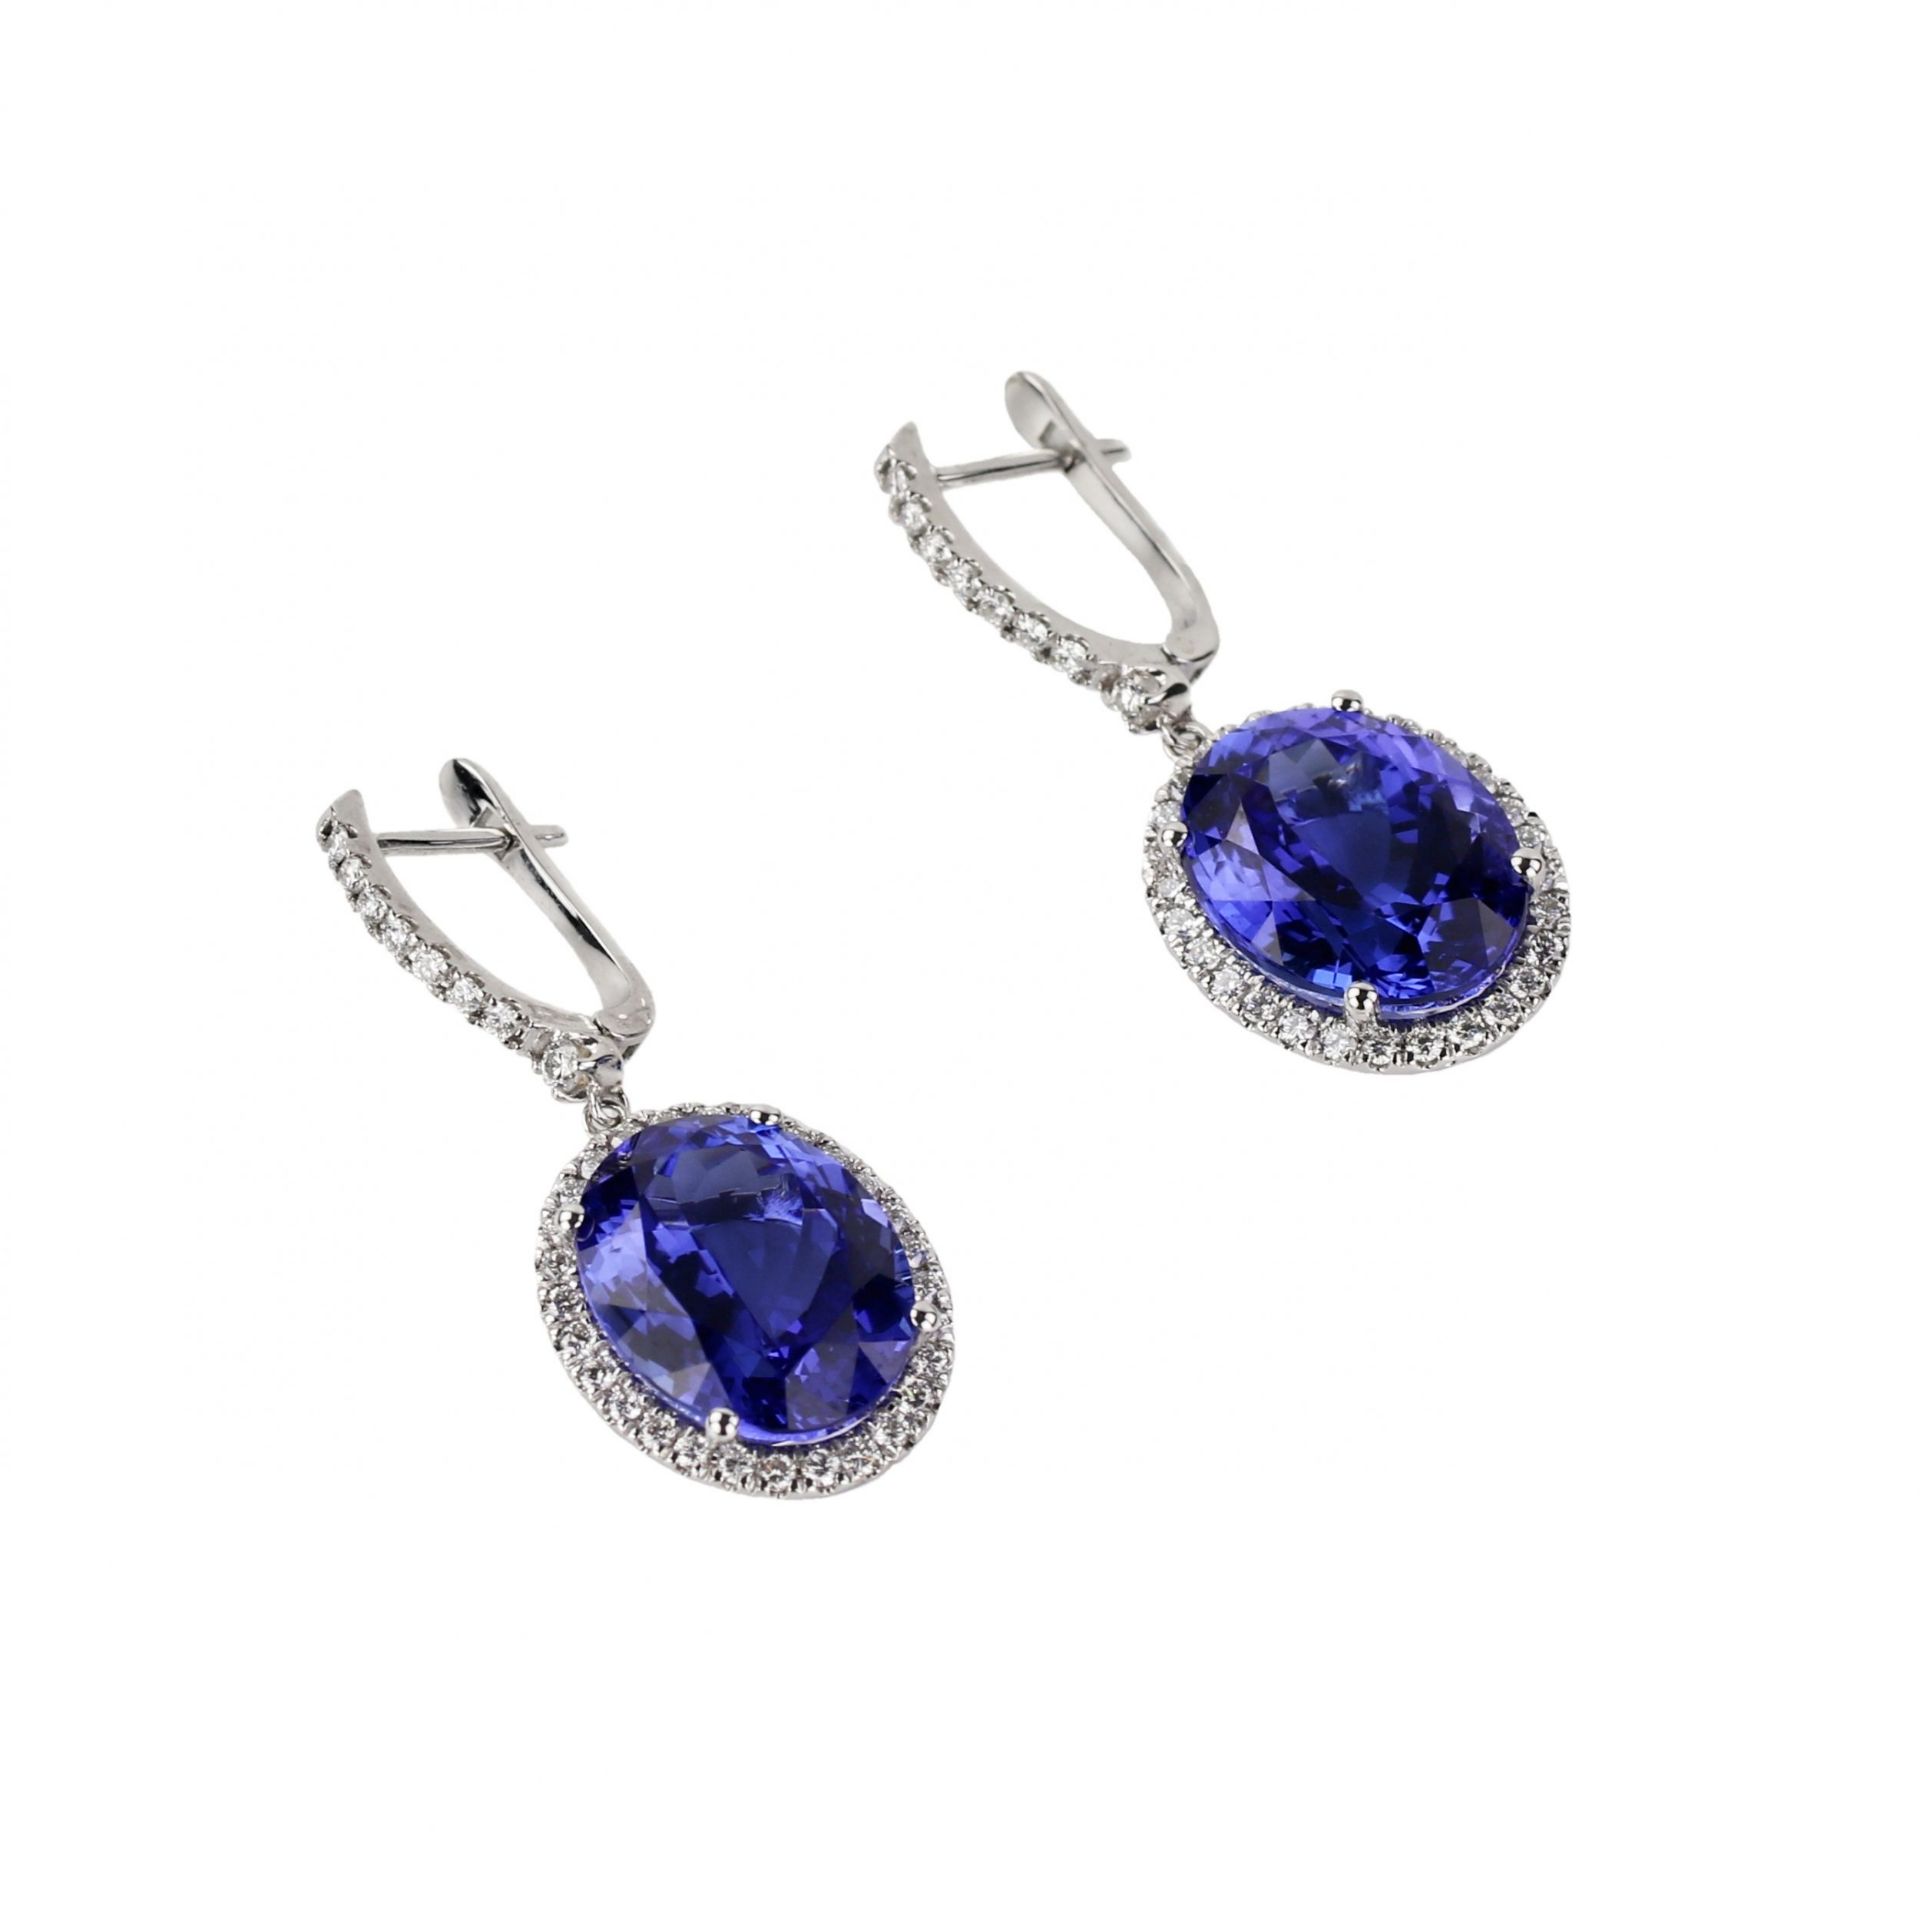 Manuel Spinosa. Gold earrings with tanzanites and diamonds. - Image 3 of 7